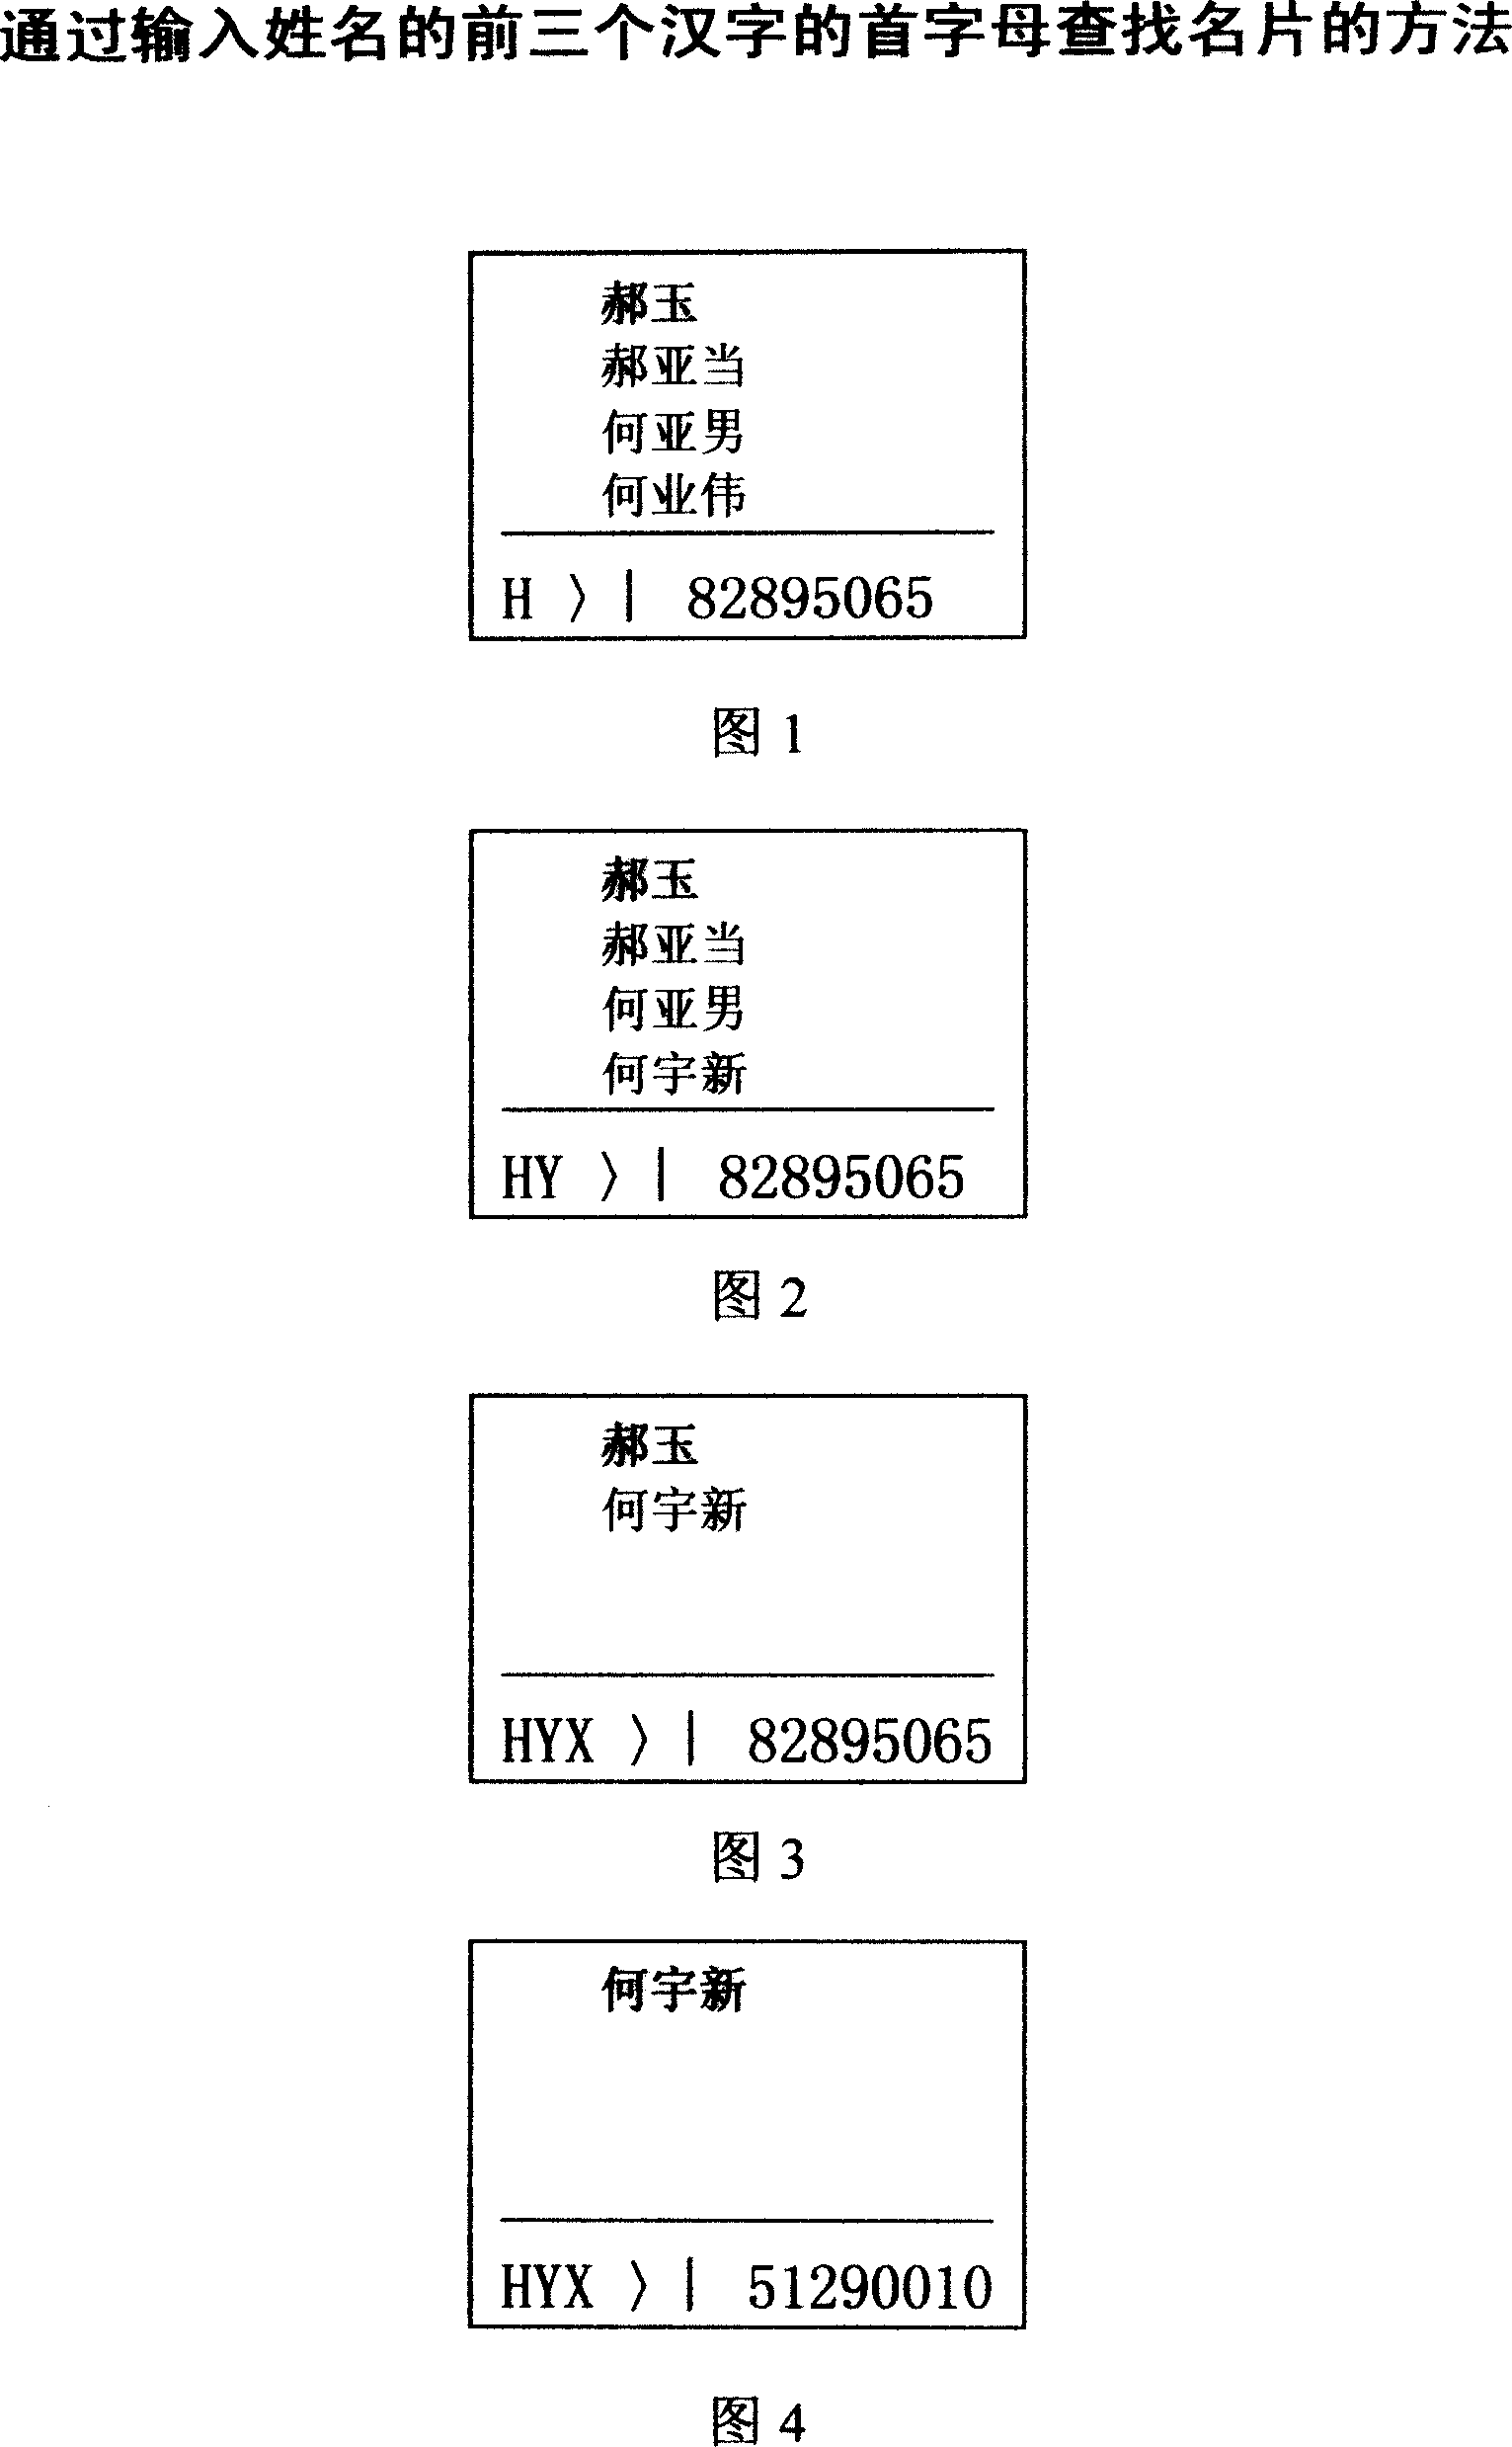 Method for searching name card by entering initials of the first three characters of the name